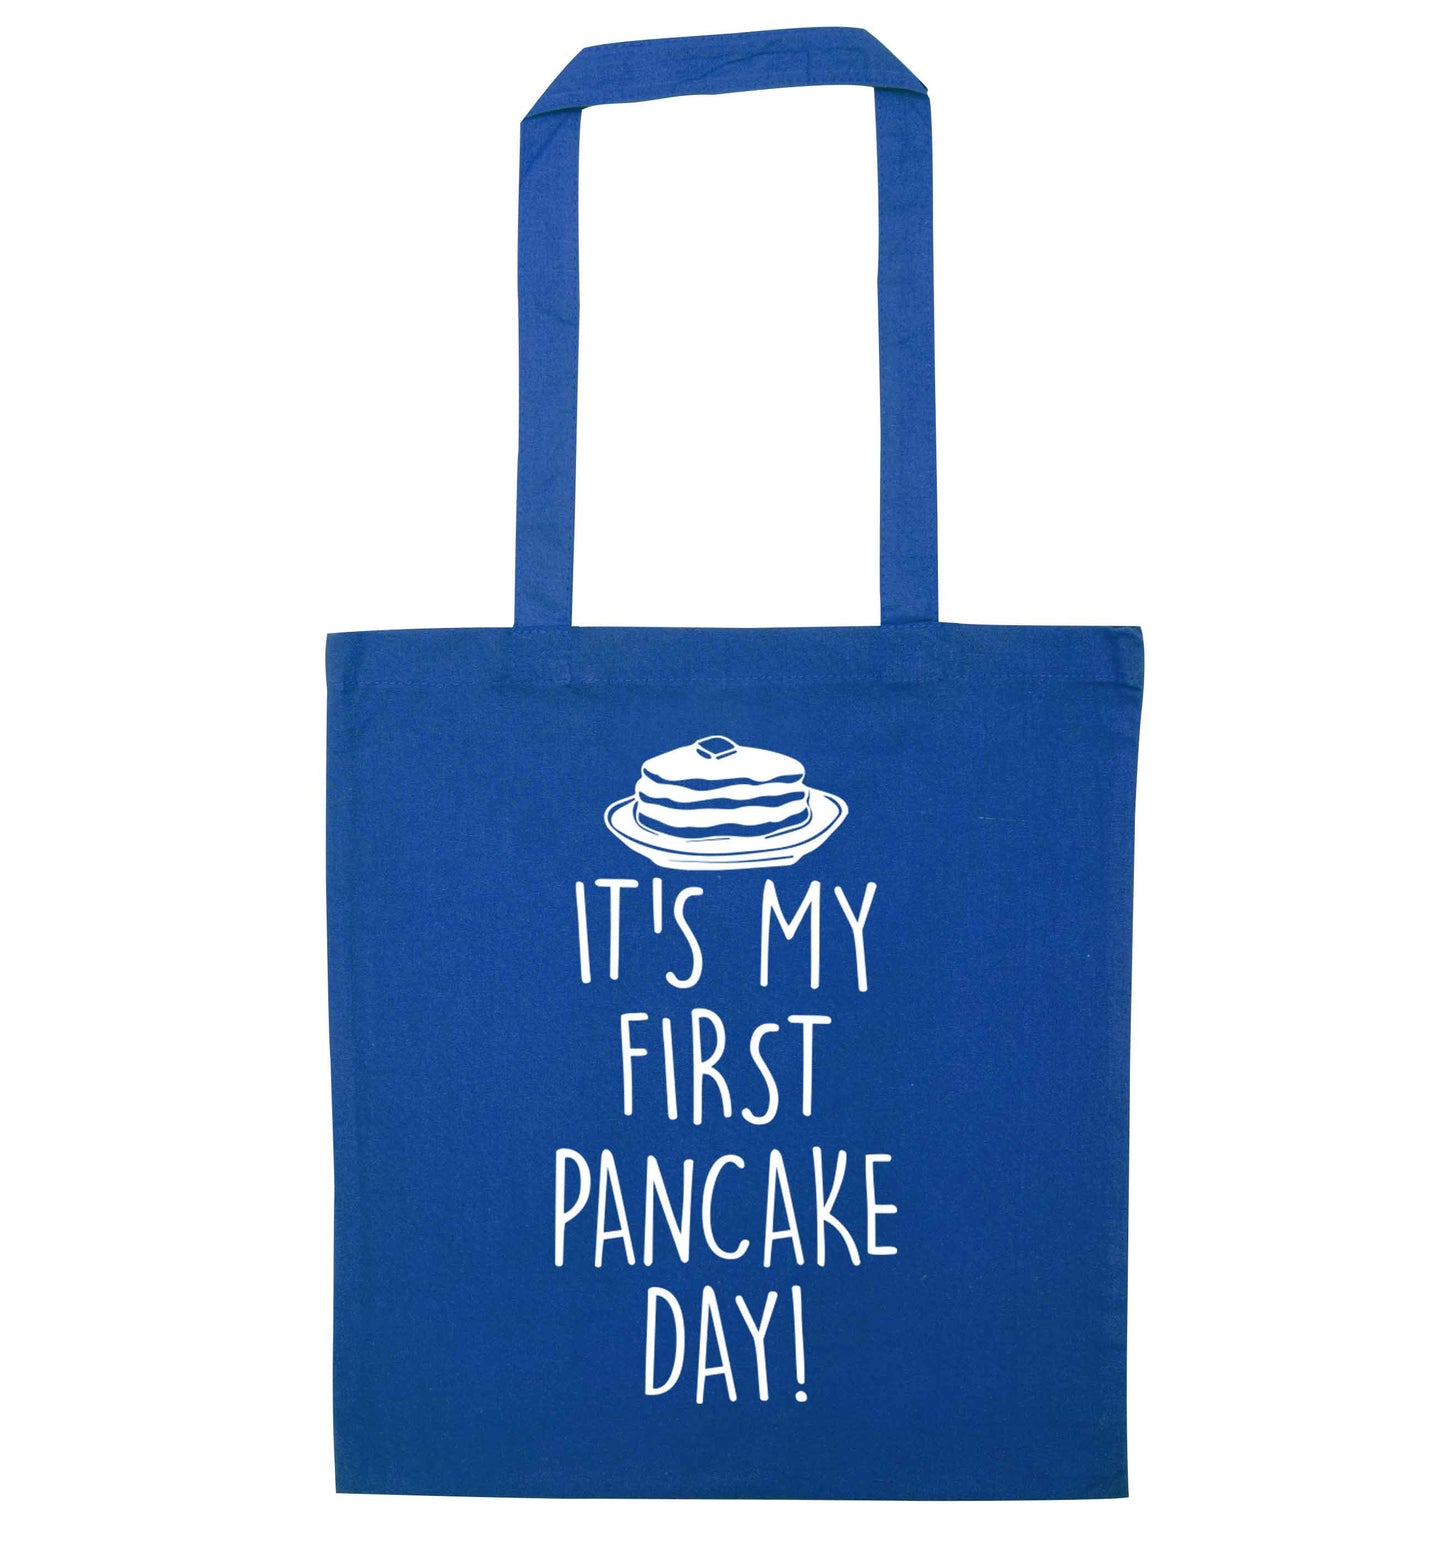 It's my first pancake day blue tote bag